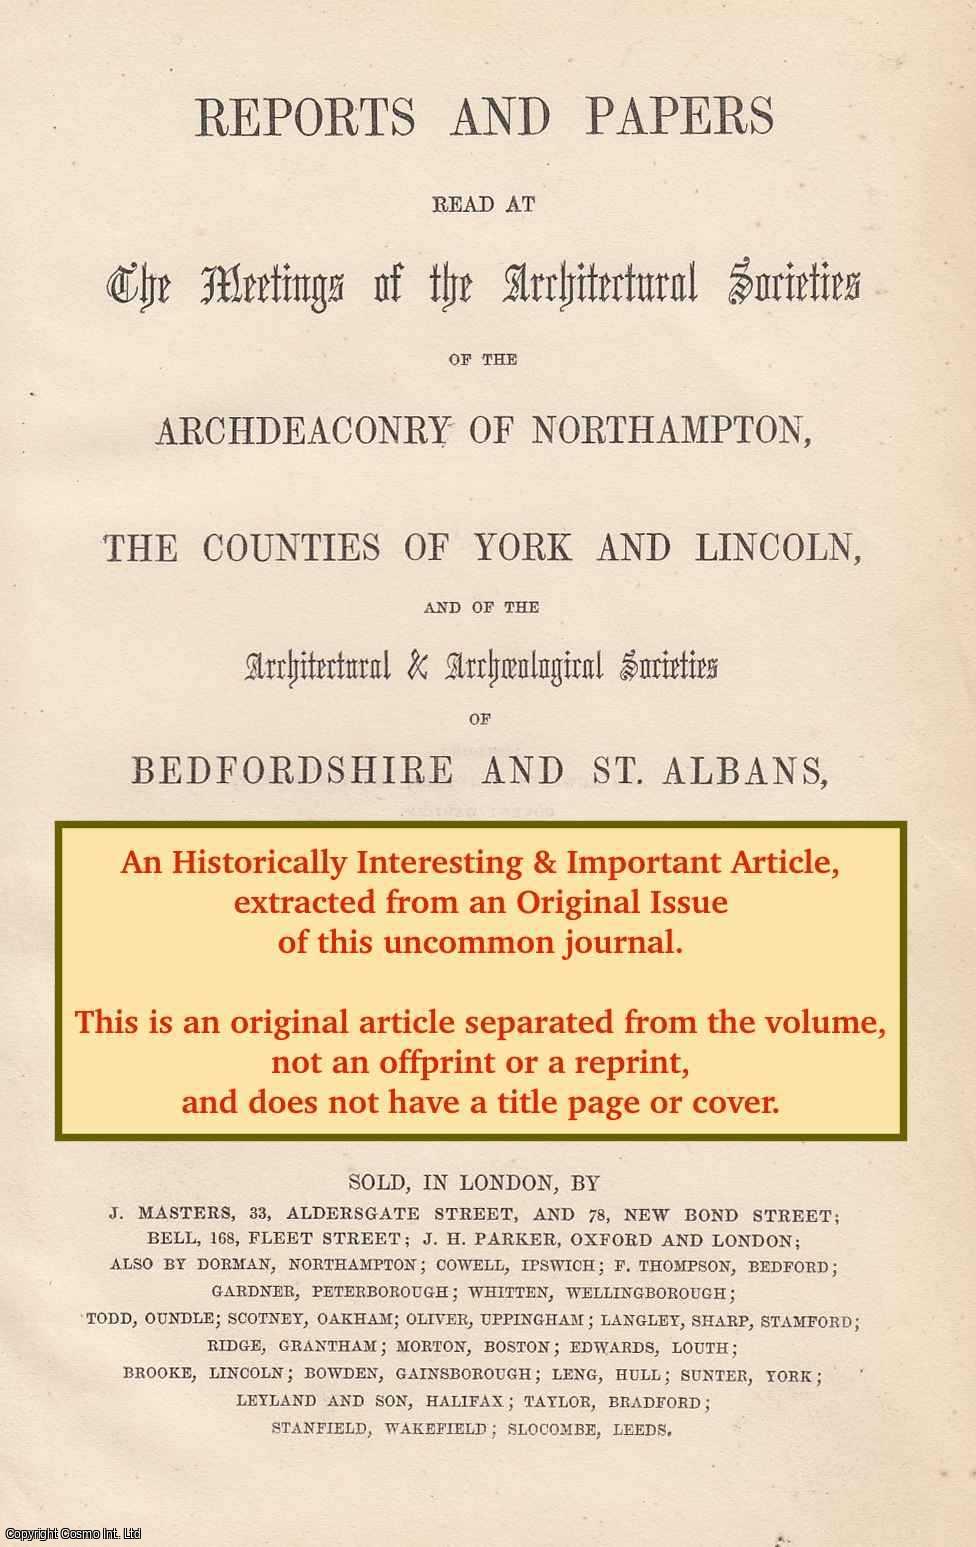 C. W. Foster - Lincolnshire Wills Proved in The Prerogaative Court of Canterbury, 1471-1490. An original article from Associated Architectural Societies, Reports and Papers, 1933.